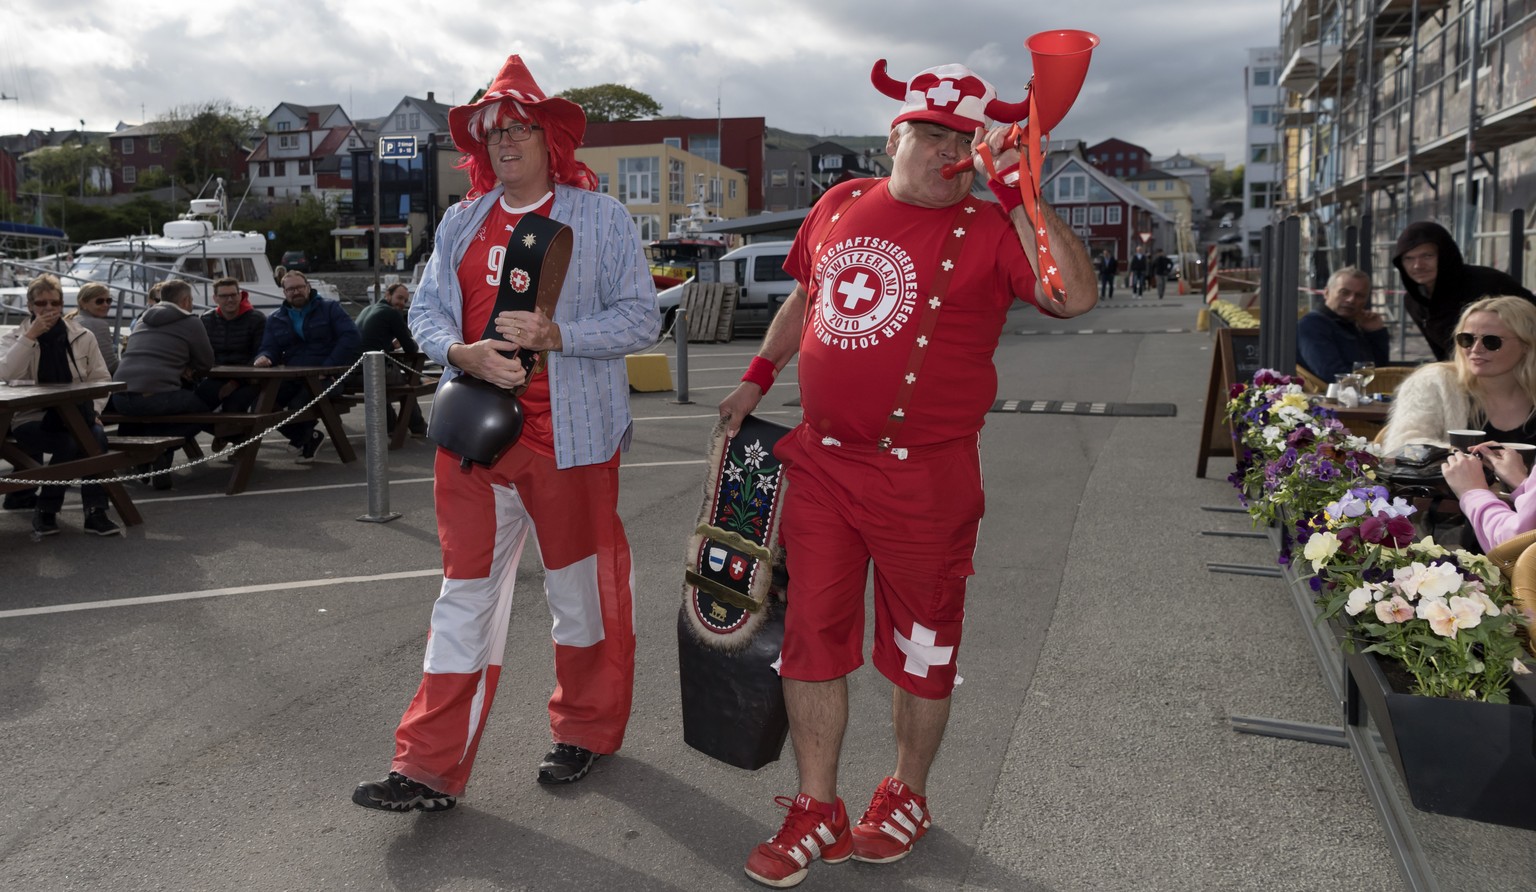 Tow Swiss fans with cowbells parade through Torshavn, Faroe Islands, on Thursday, June 8, 2017. Switzerland is scheduled to play a 2018 Fifa World Cup Russia group B qualification soccer match against ...